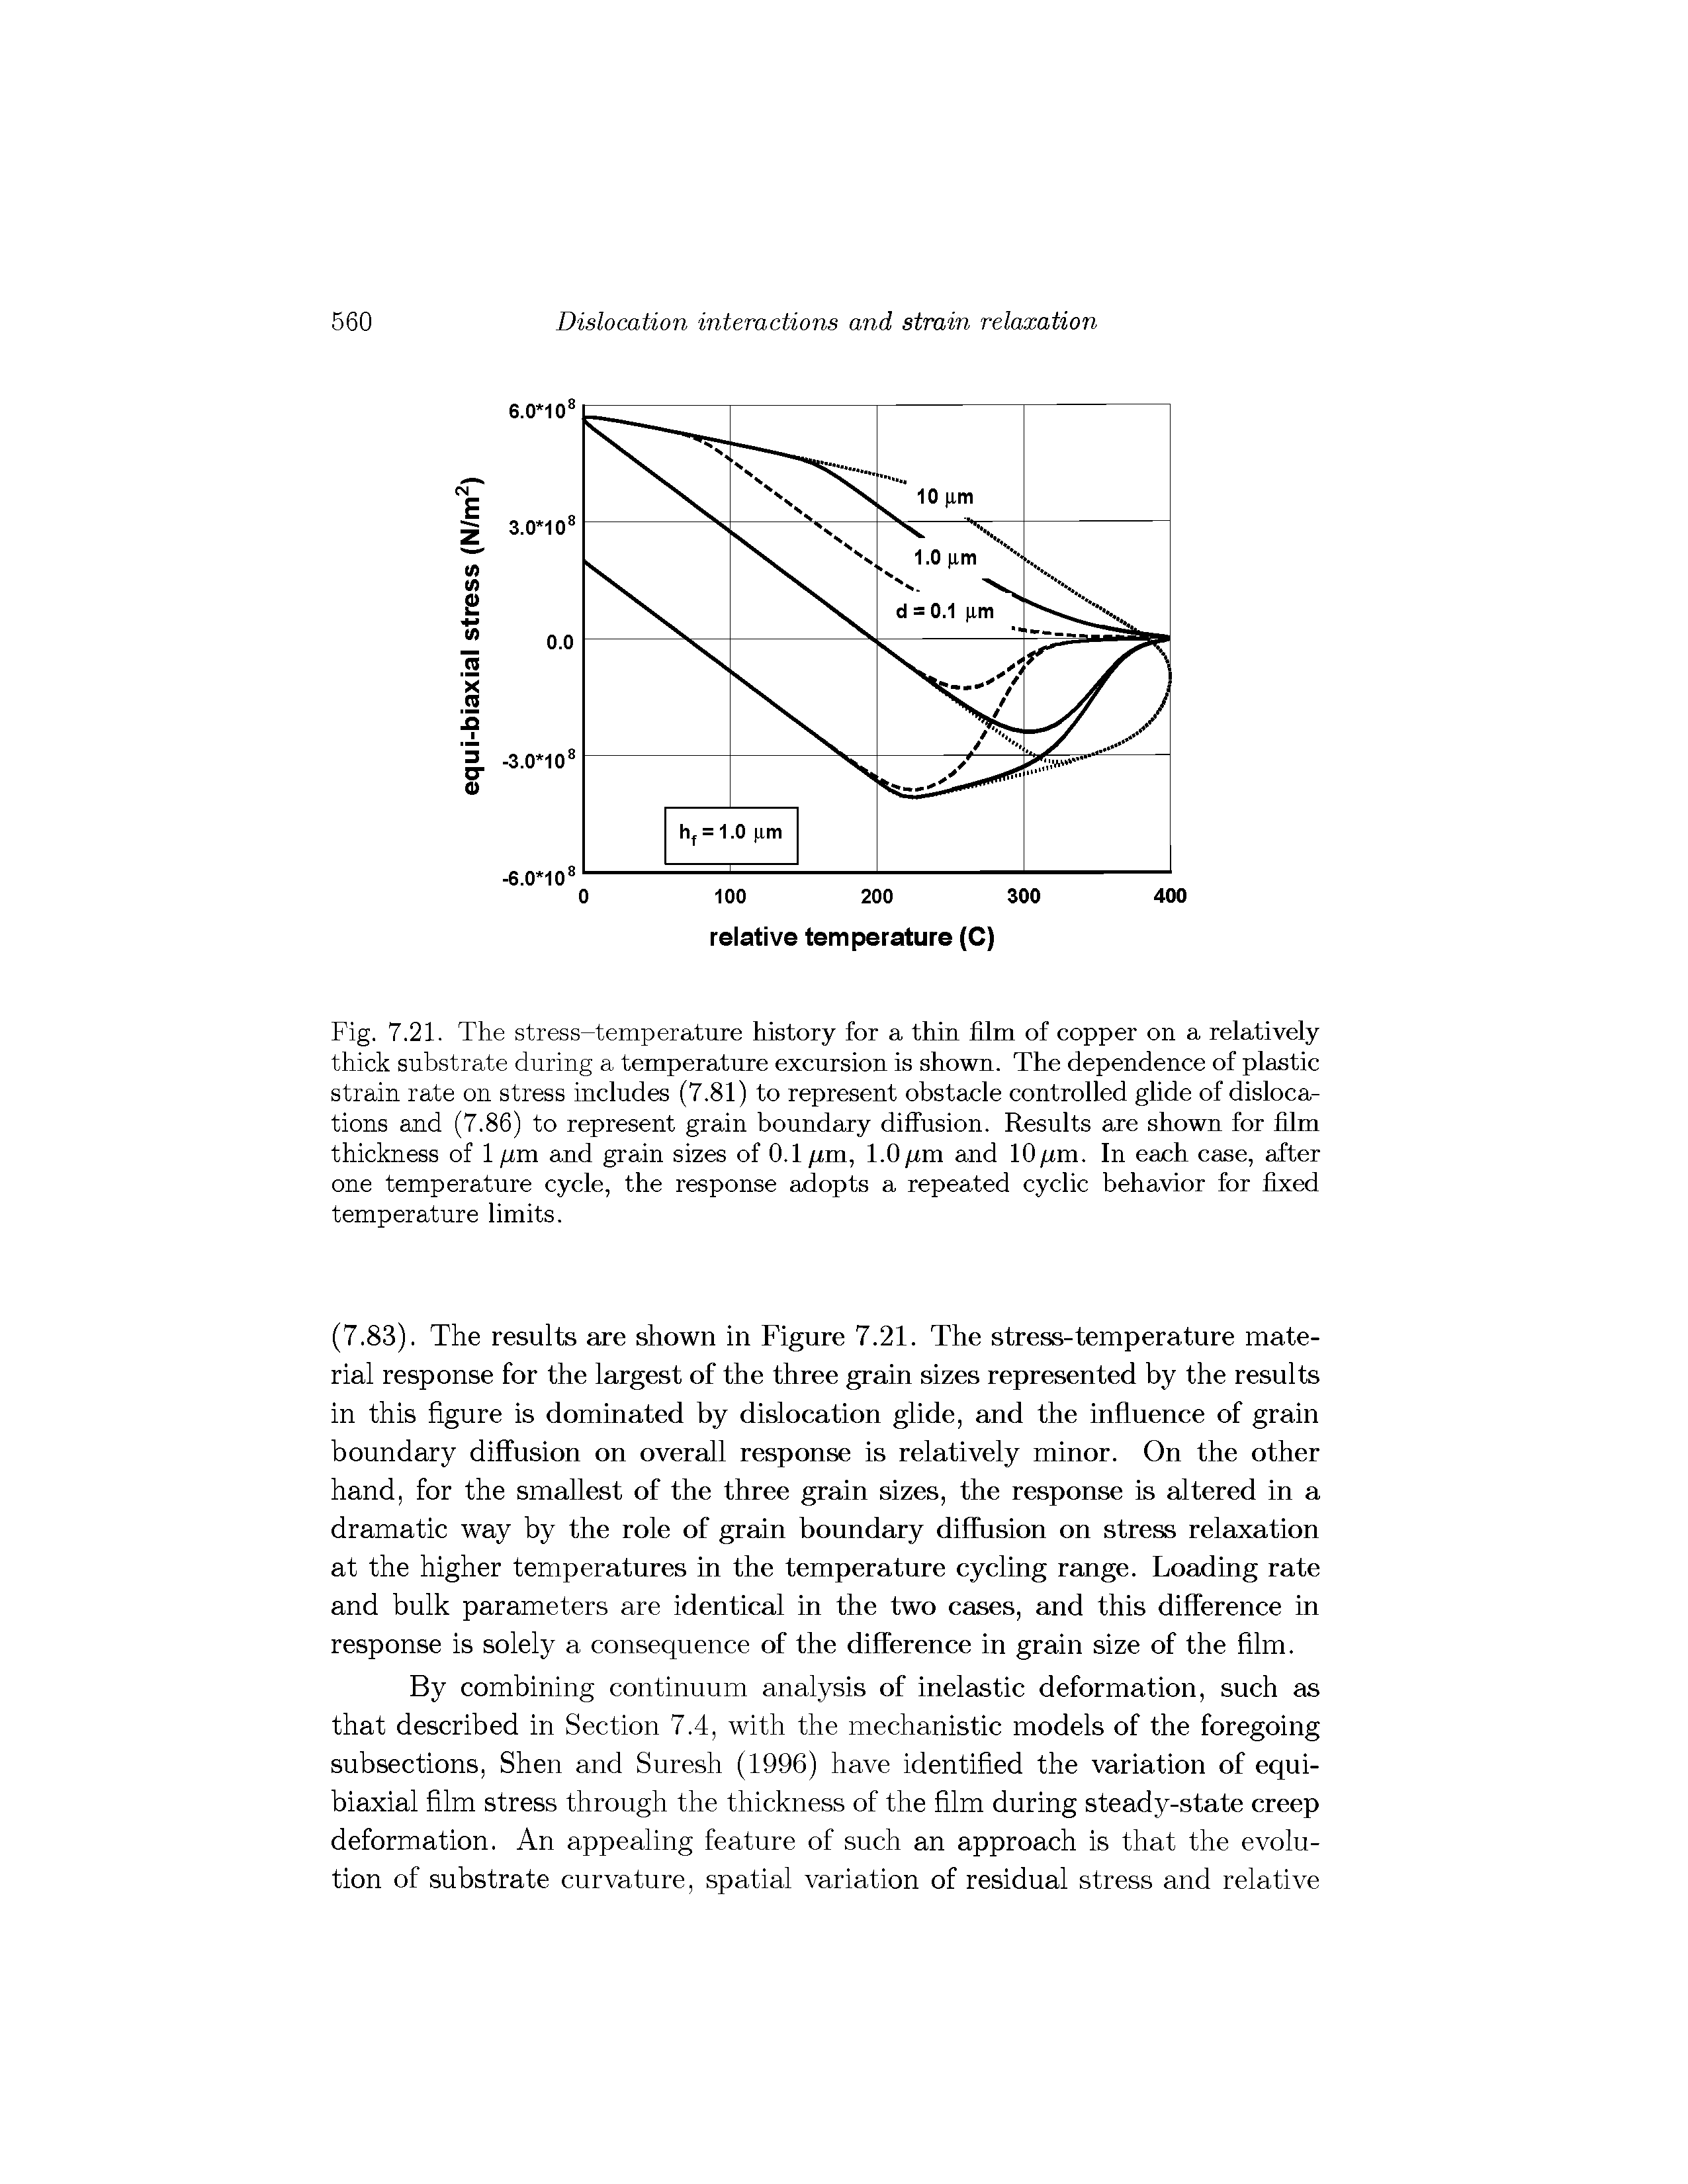 Fig. 7.21. The stress-temperature history for a thin film of copper on a relatively thick substrate during a temperature excursion is shown. The dependence of plastic strain rate on stress includes (7.81) to represent obstacle controlled glide of dislocations and (7.86) to represent grain boundary diffusion. Results are shown for film thickness of 1 fim and grain sizes of 0.1 fxm, 1.0/<m and lO um. In each case, after one temperature cycle, the response adopts a repeated cyclic behavior for fixed temperature limits.